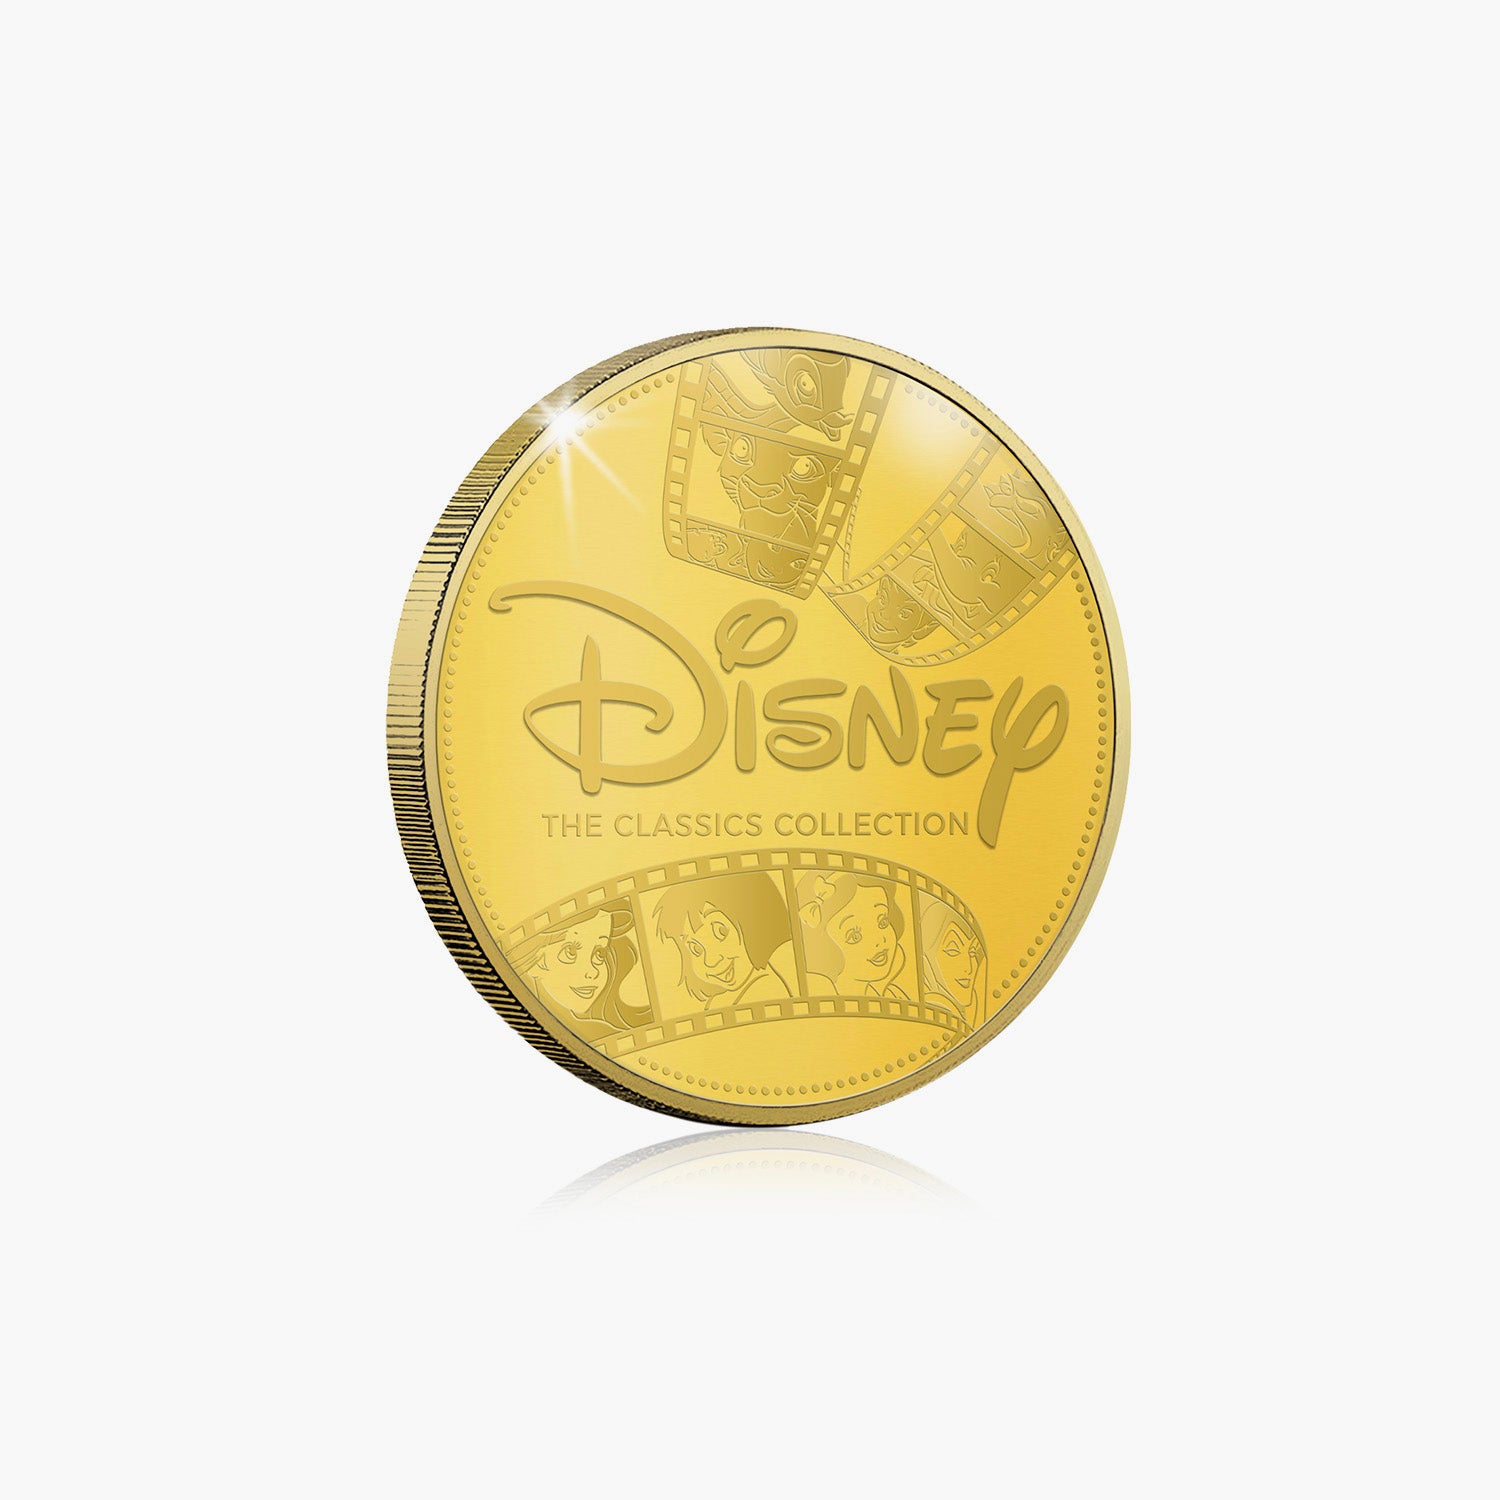 The Princess And The Frog Commemorative - Gold Plated